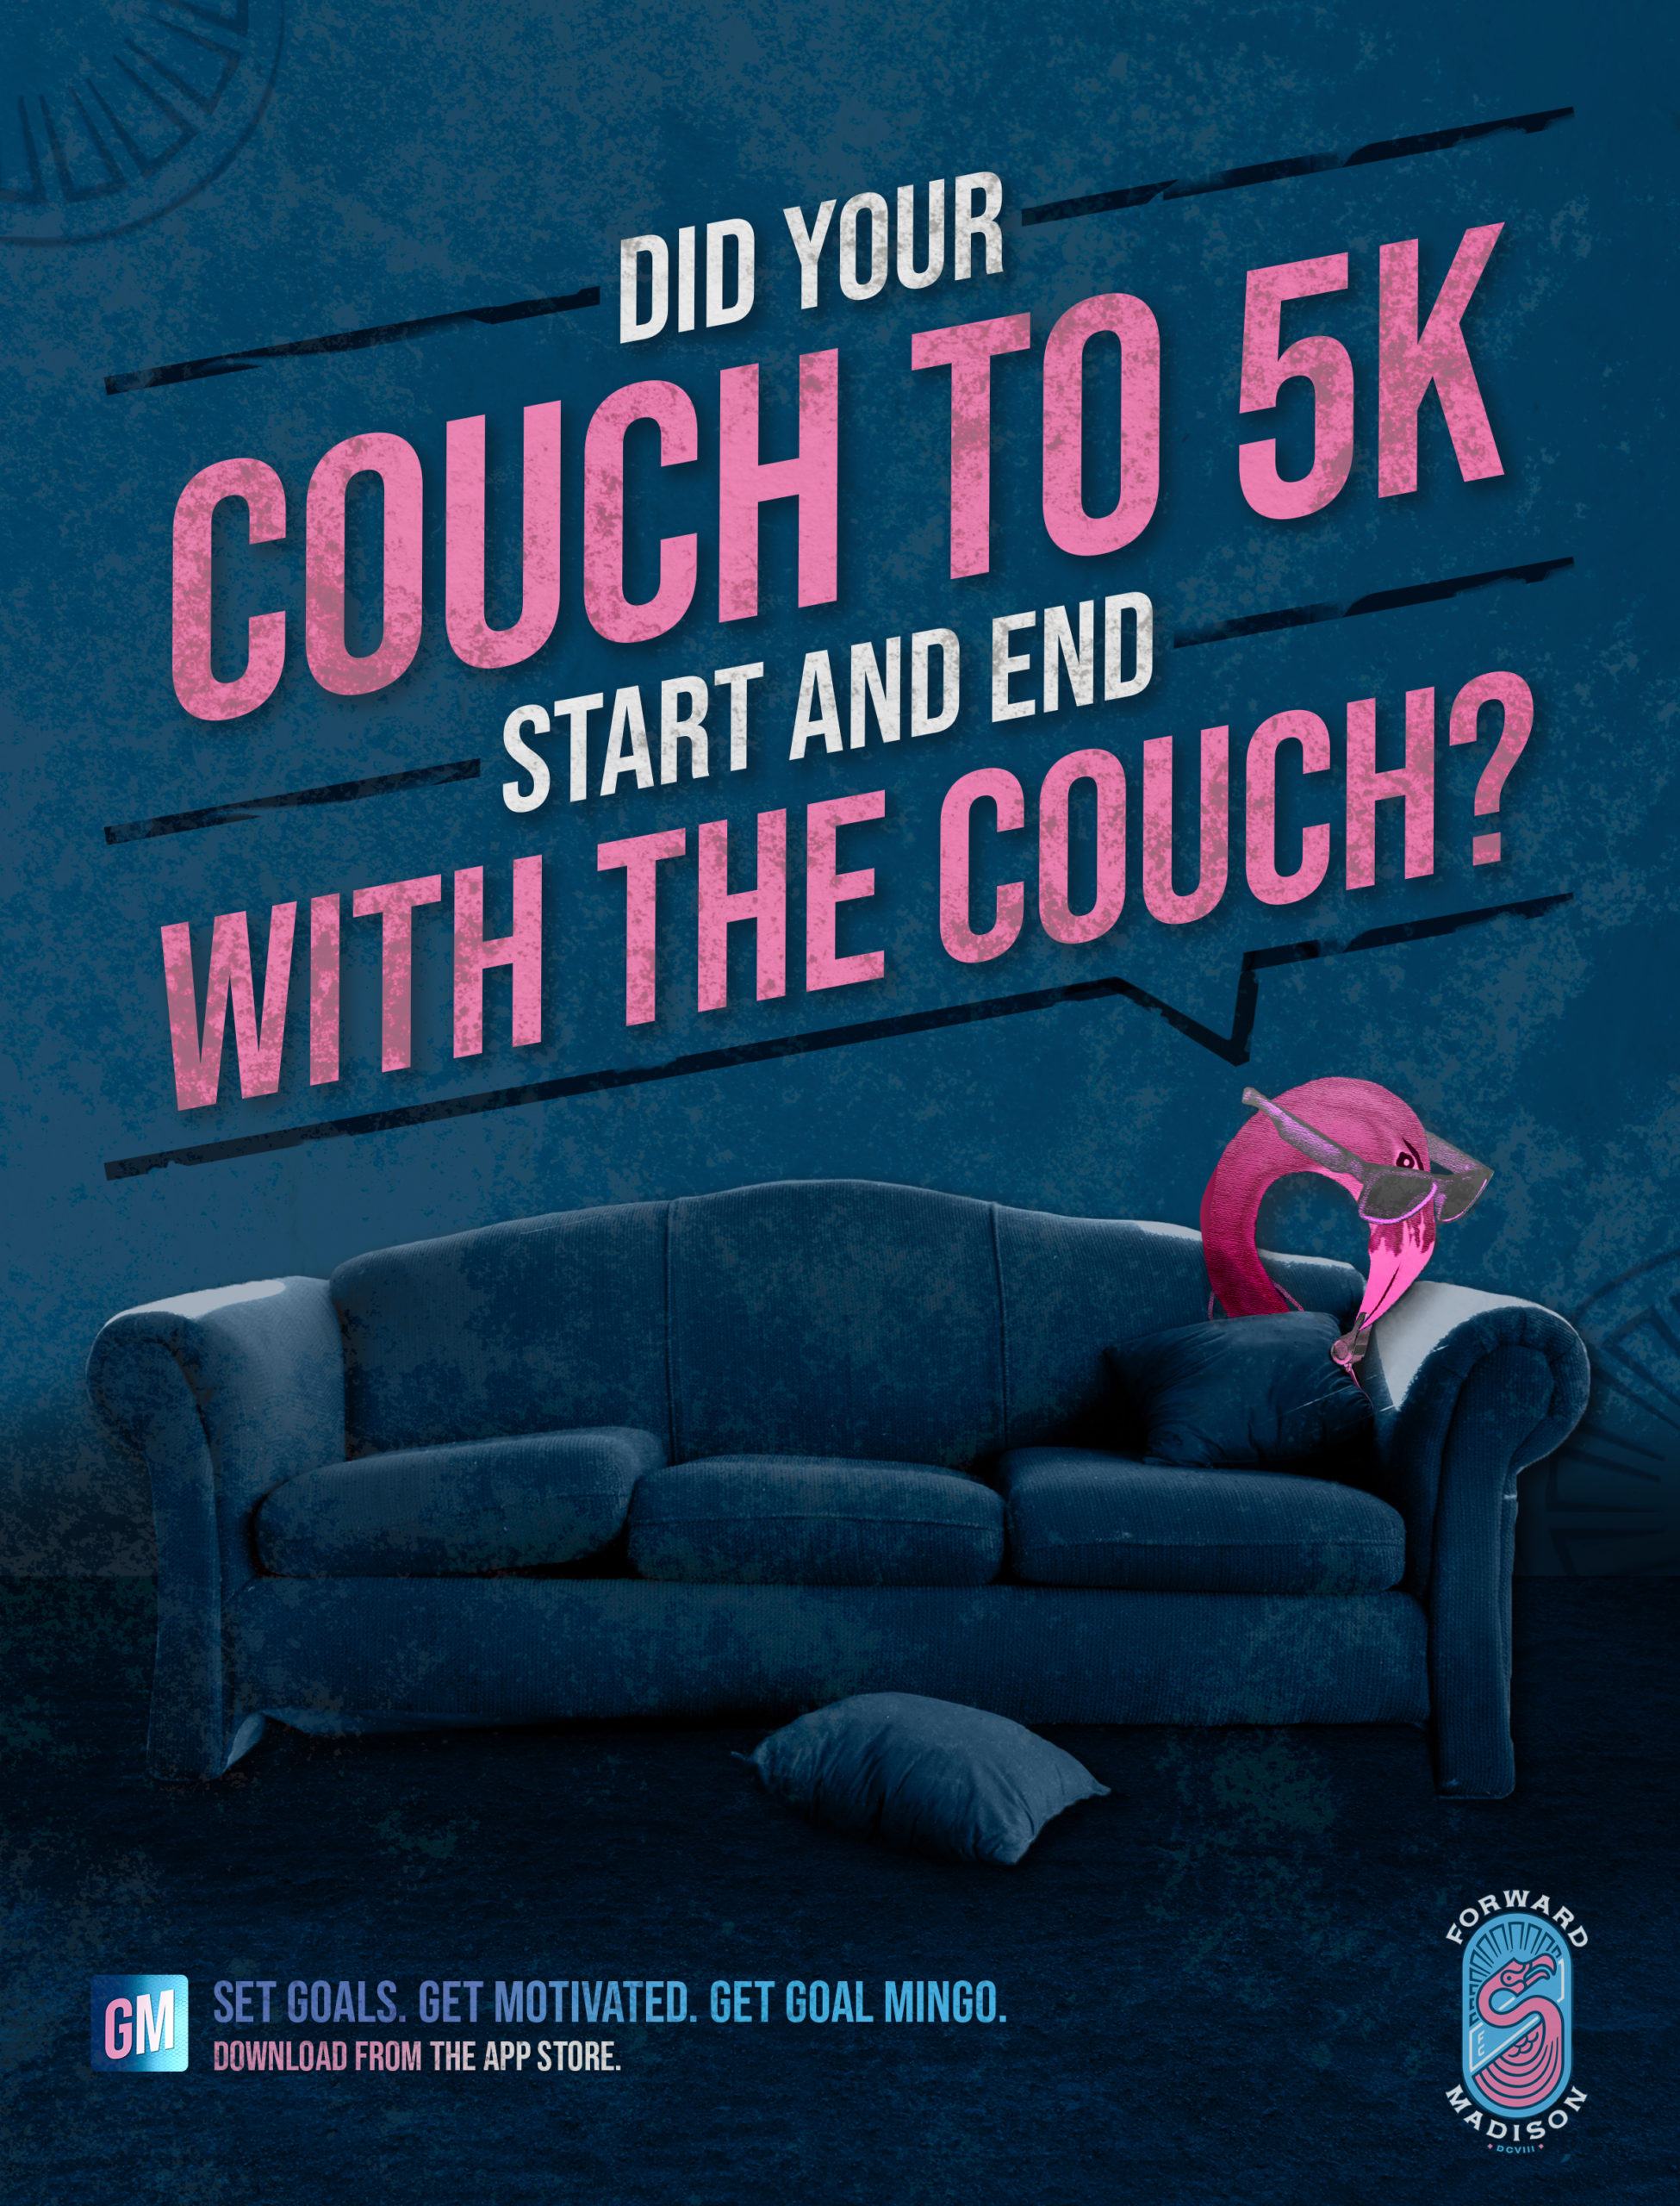 Couch to 5k Ad